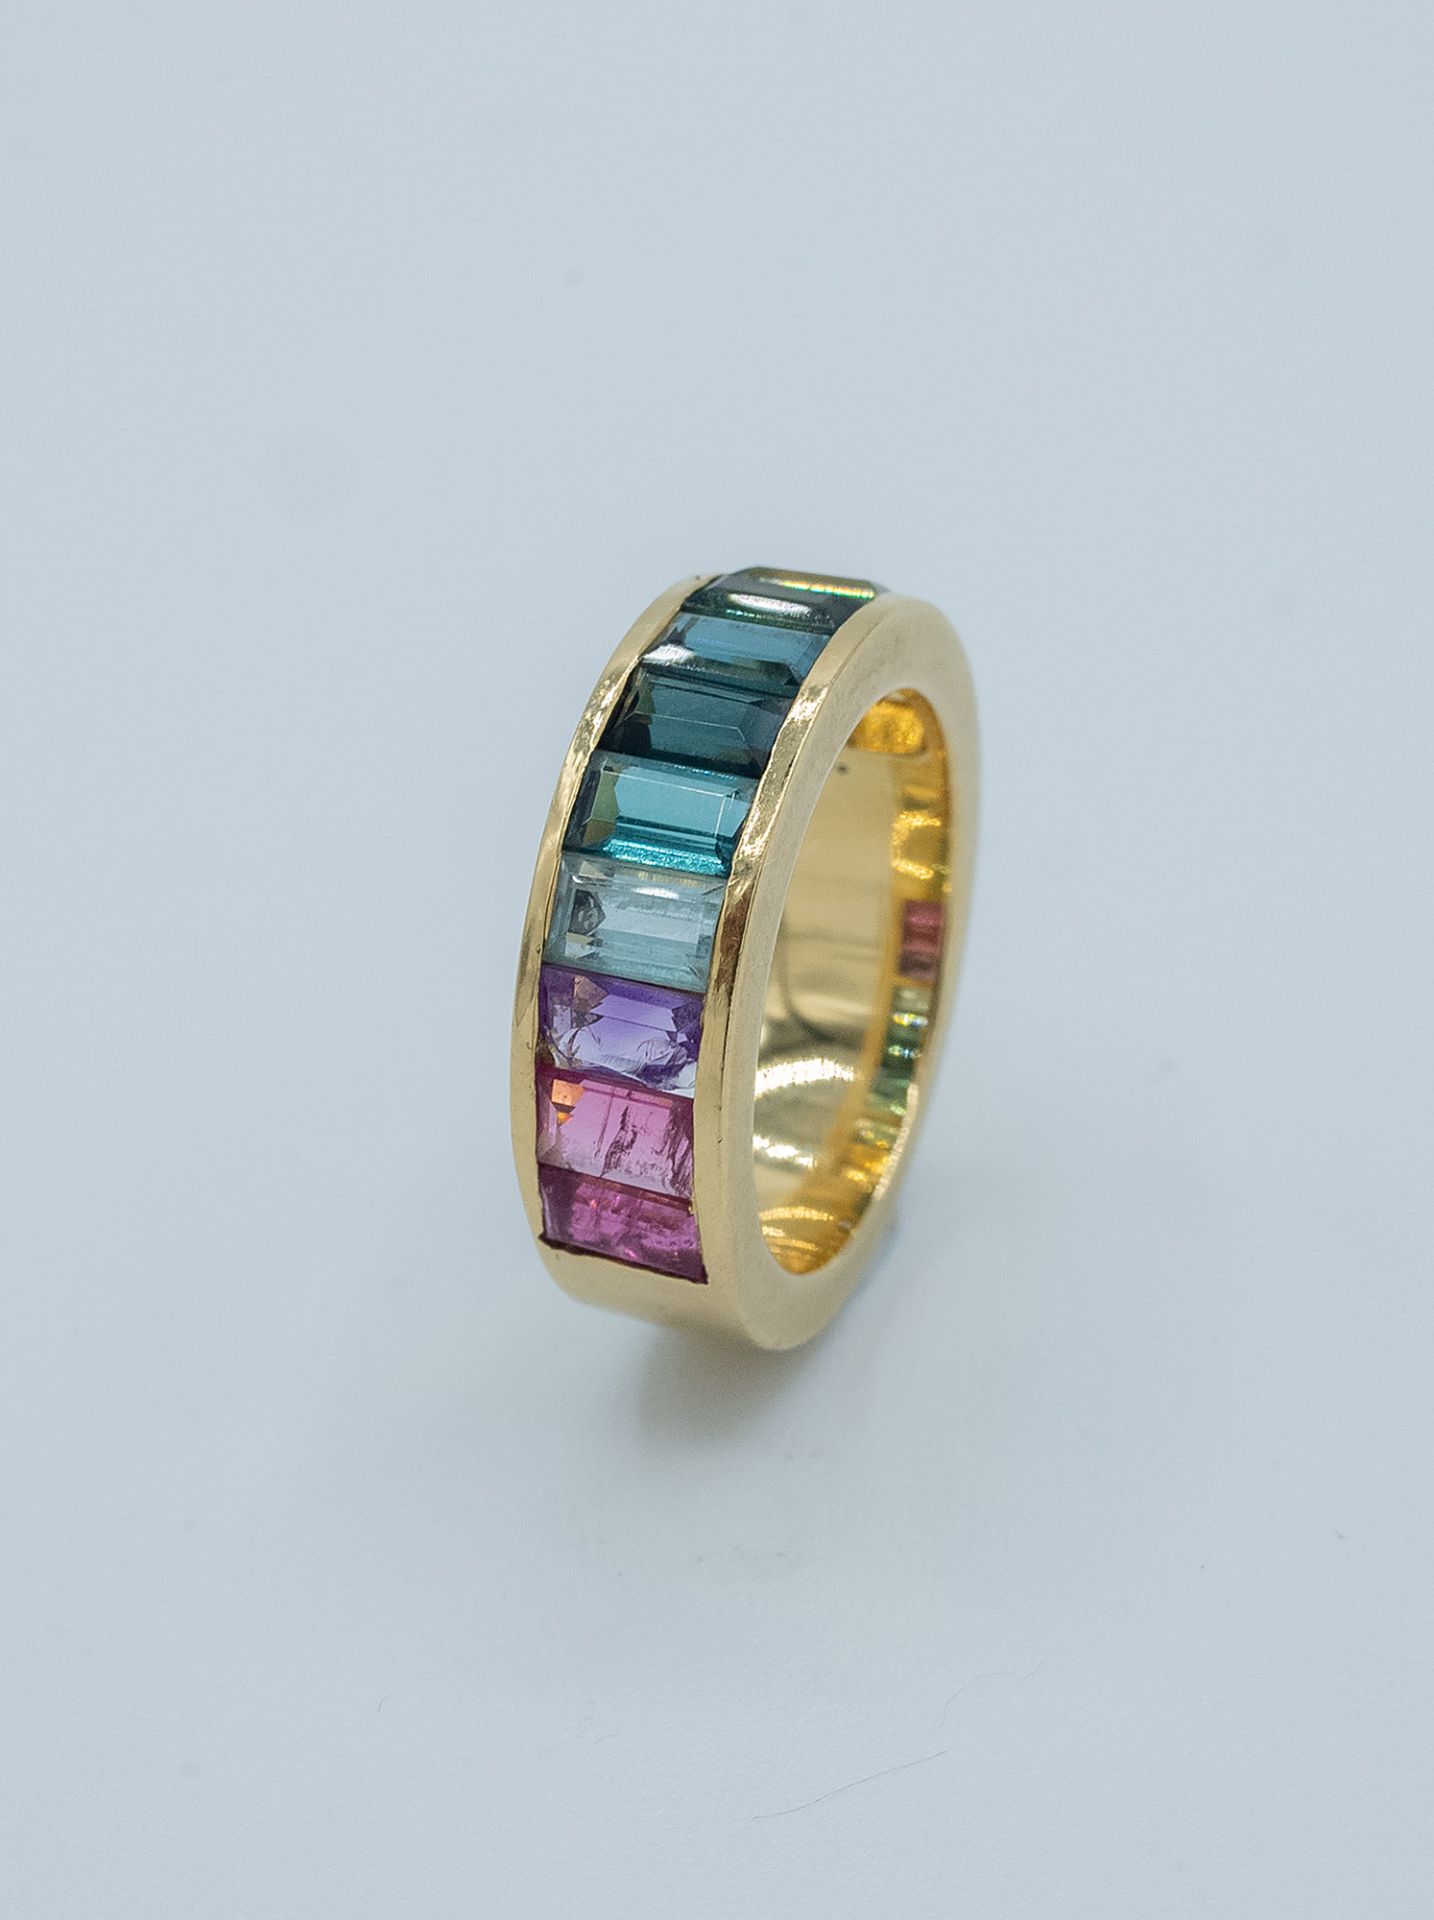 A rainbow half eternity ring with coloured stones - Image 3 of 3